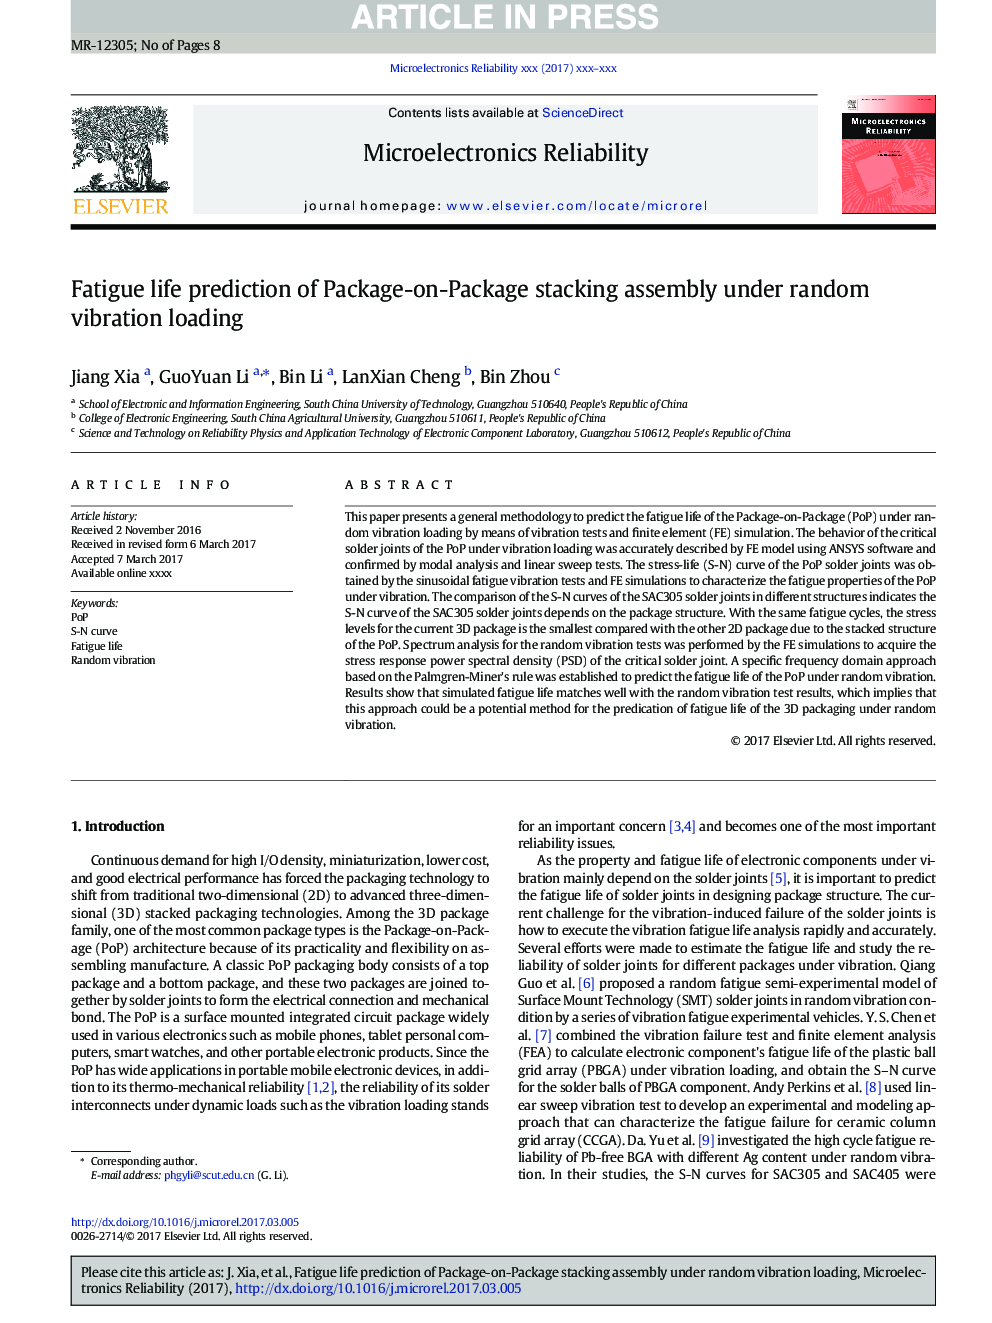 Fatigue life prediction of Package-on-Package stacking assembly under random vibration loading